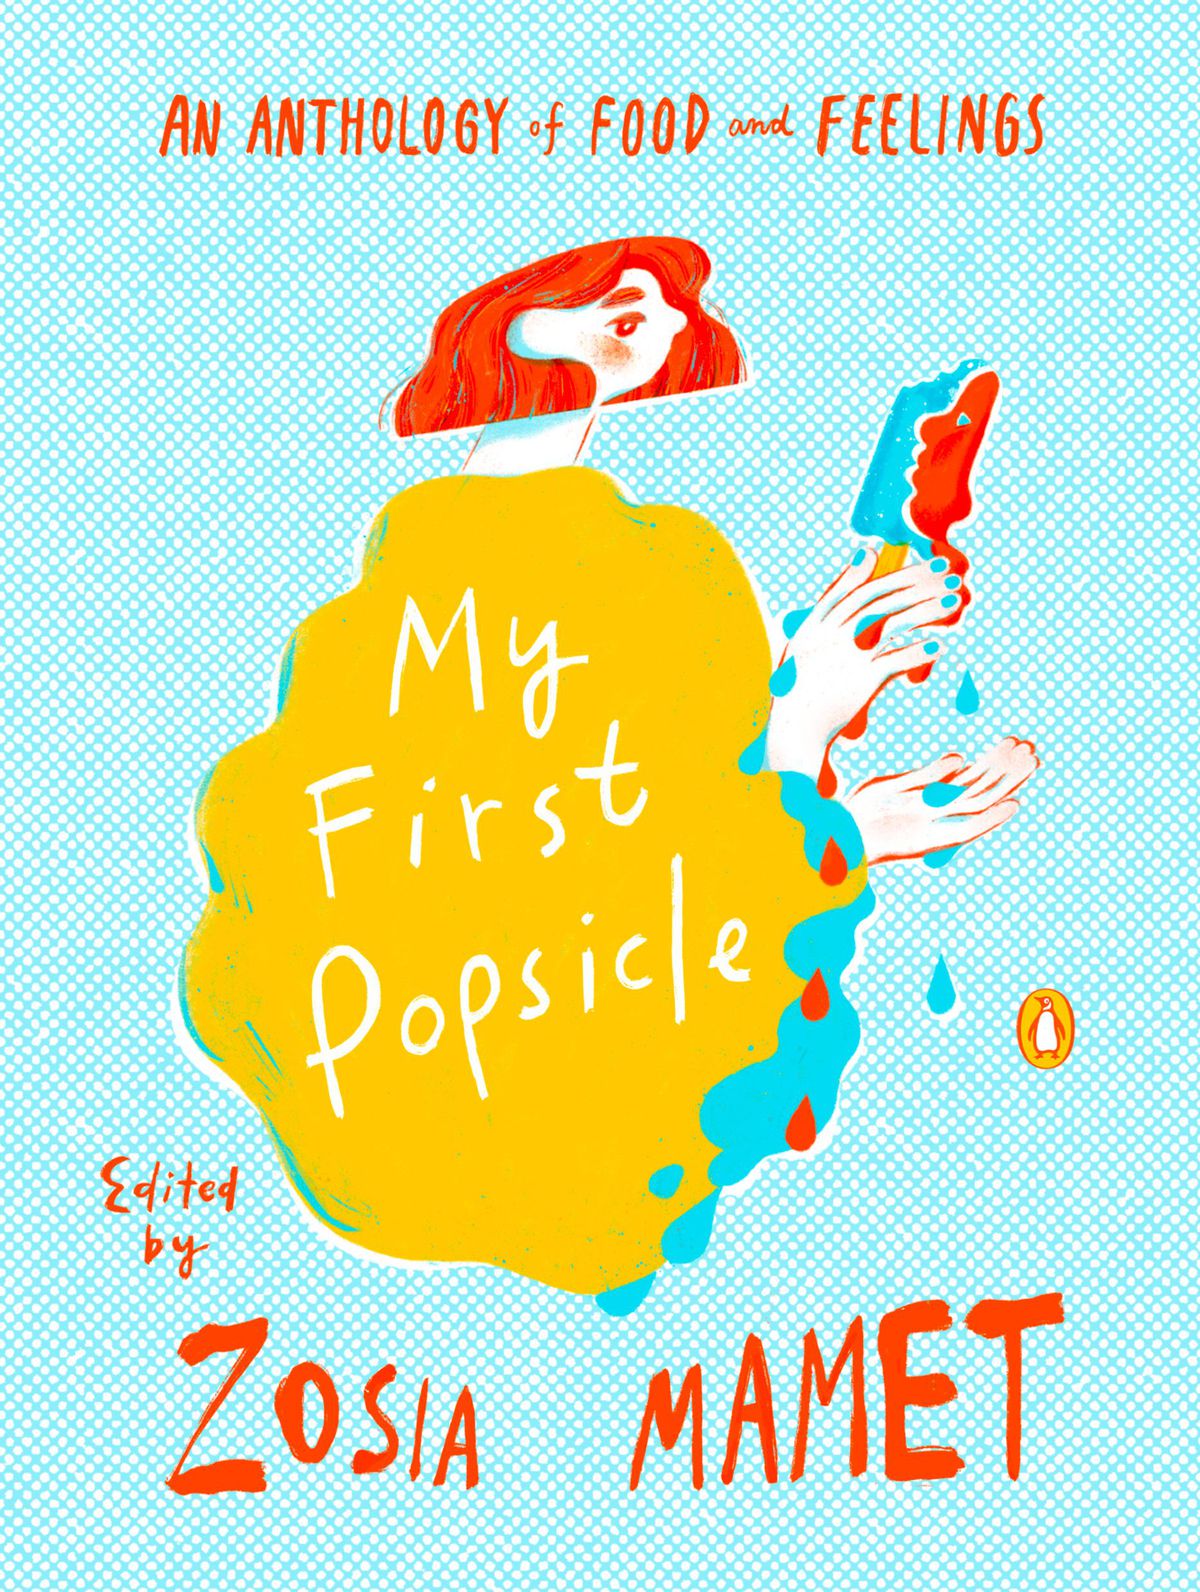 the book cover for “My First Popsicle”